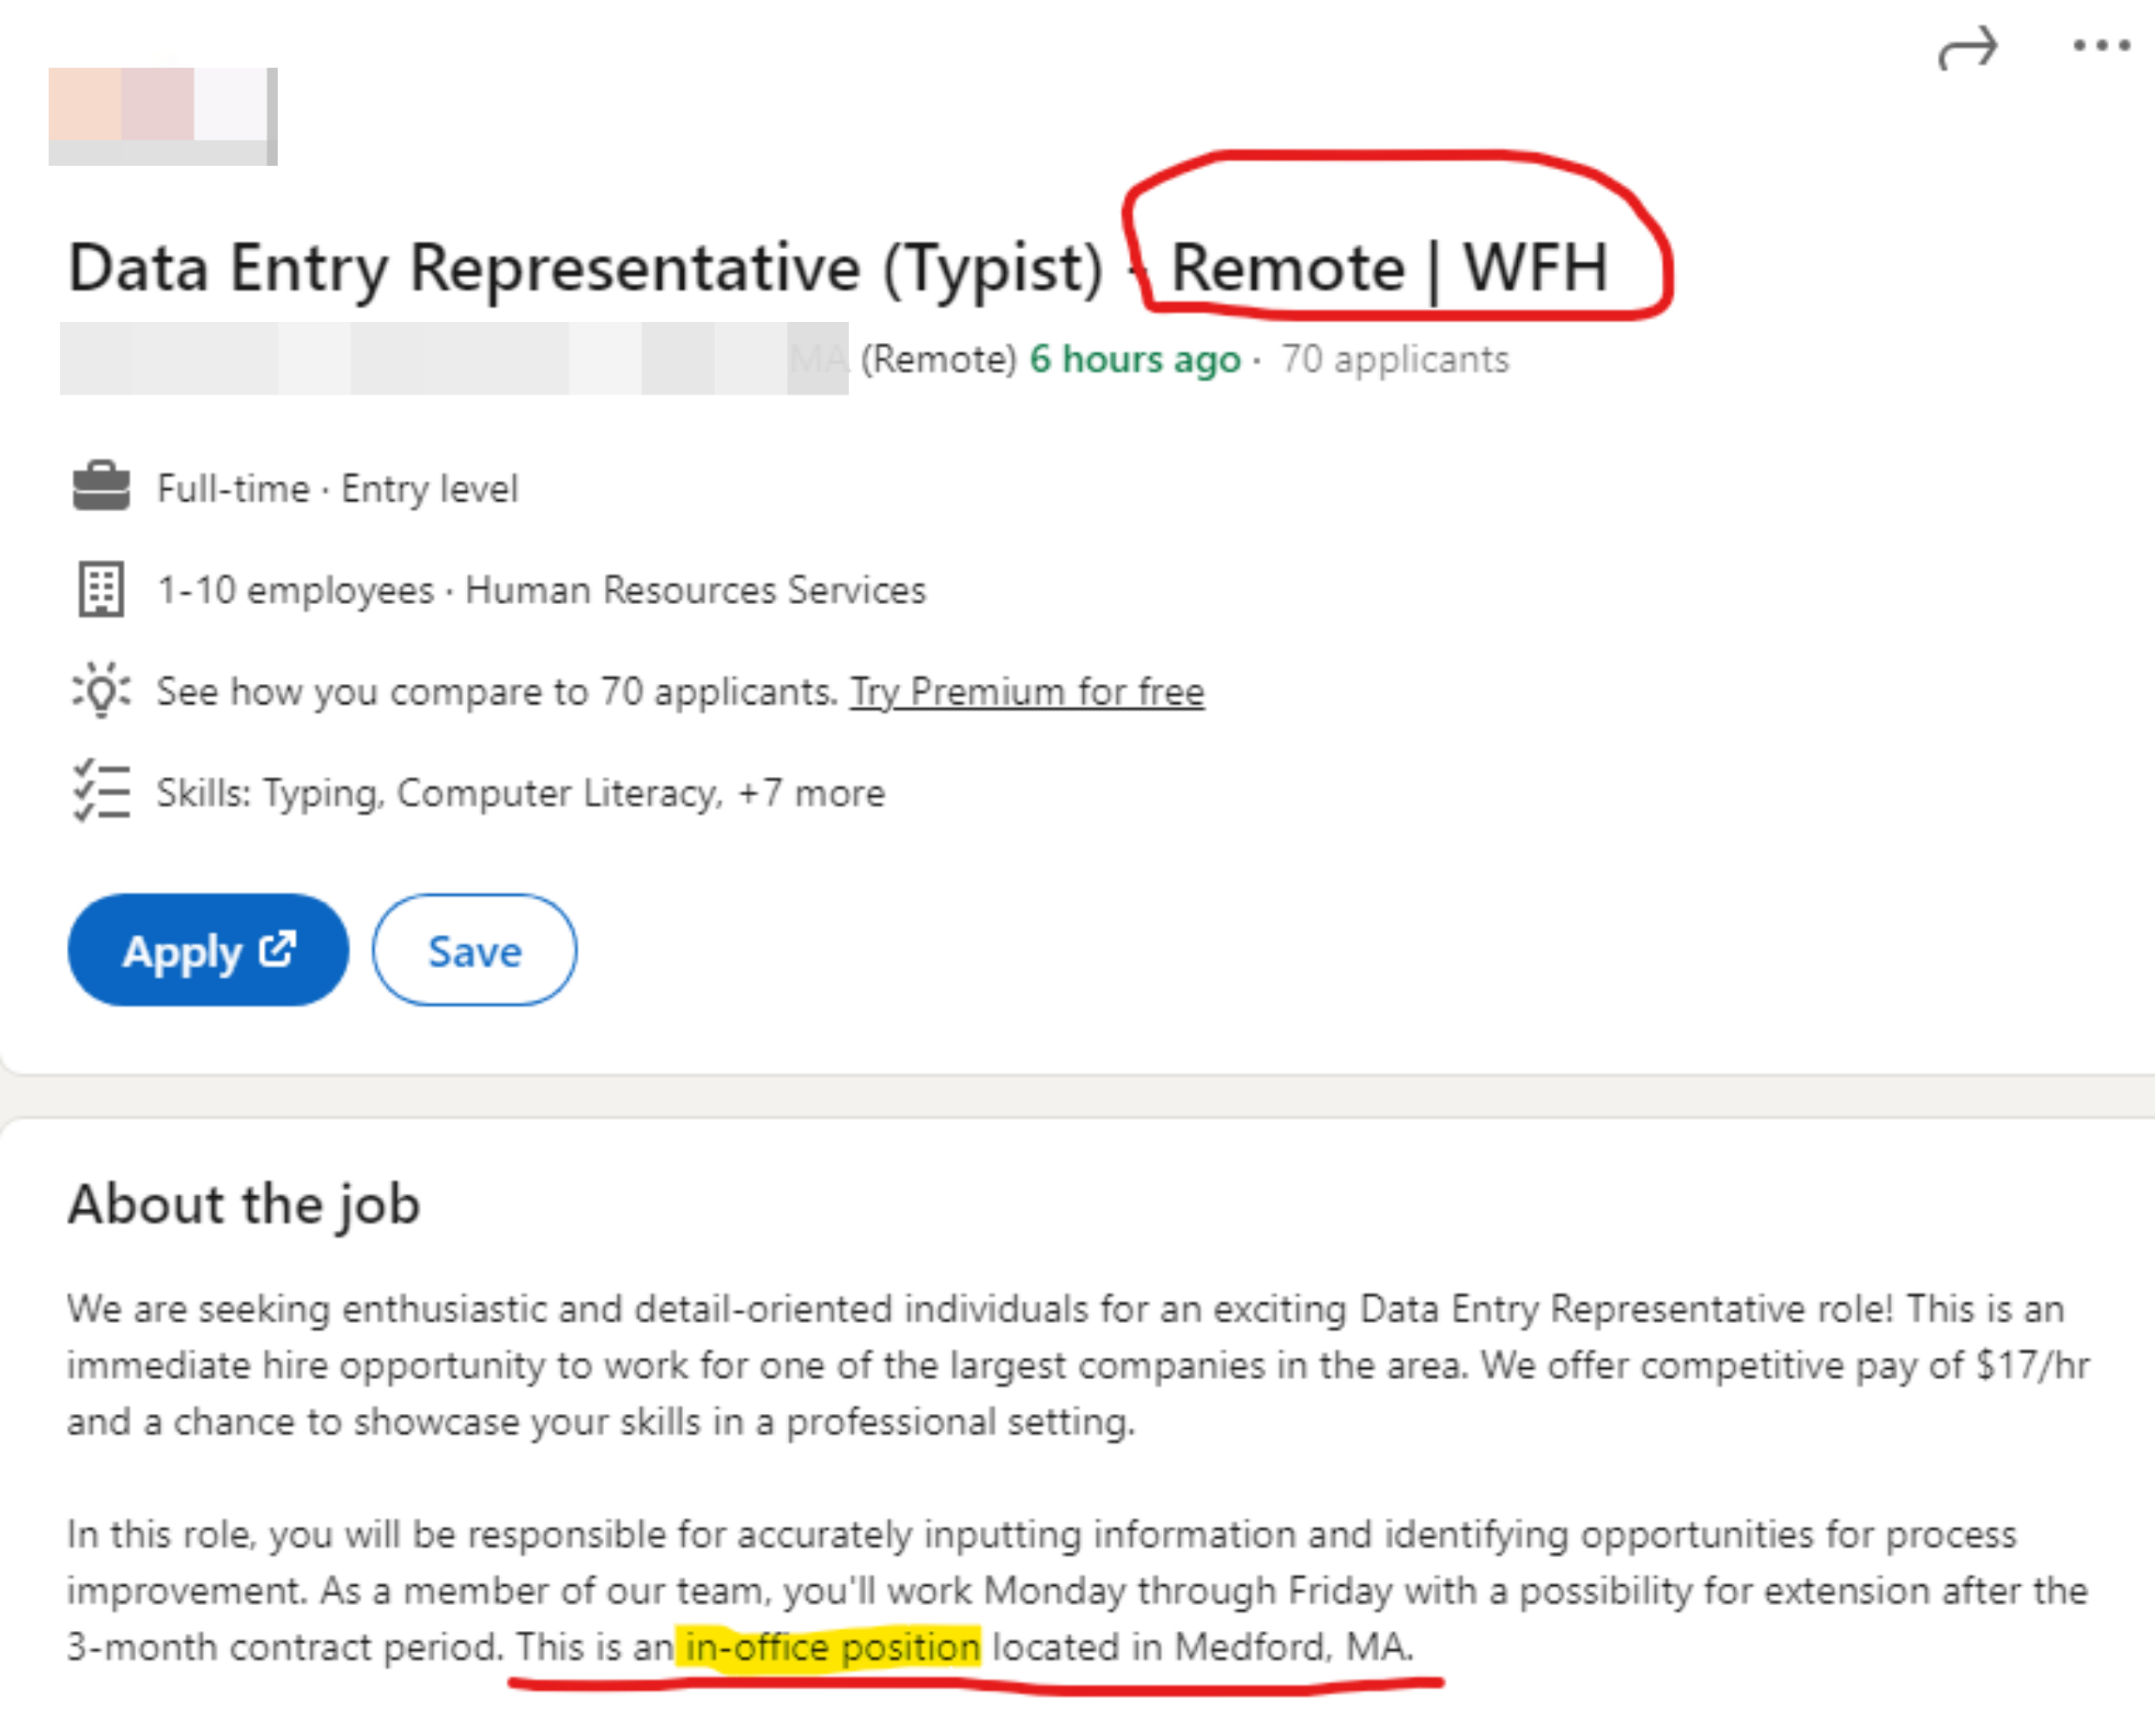 title mentions it&#x27;s work from home, but description says it&#x27;s an in-office job